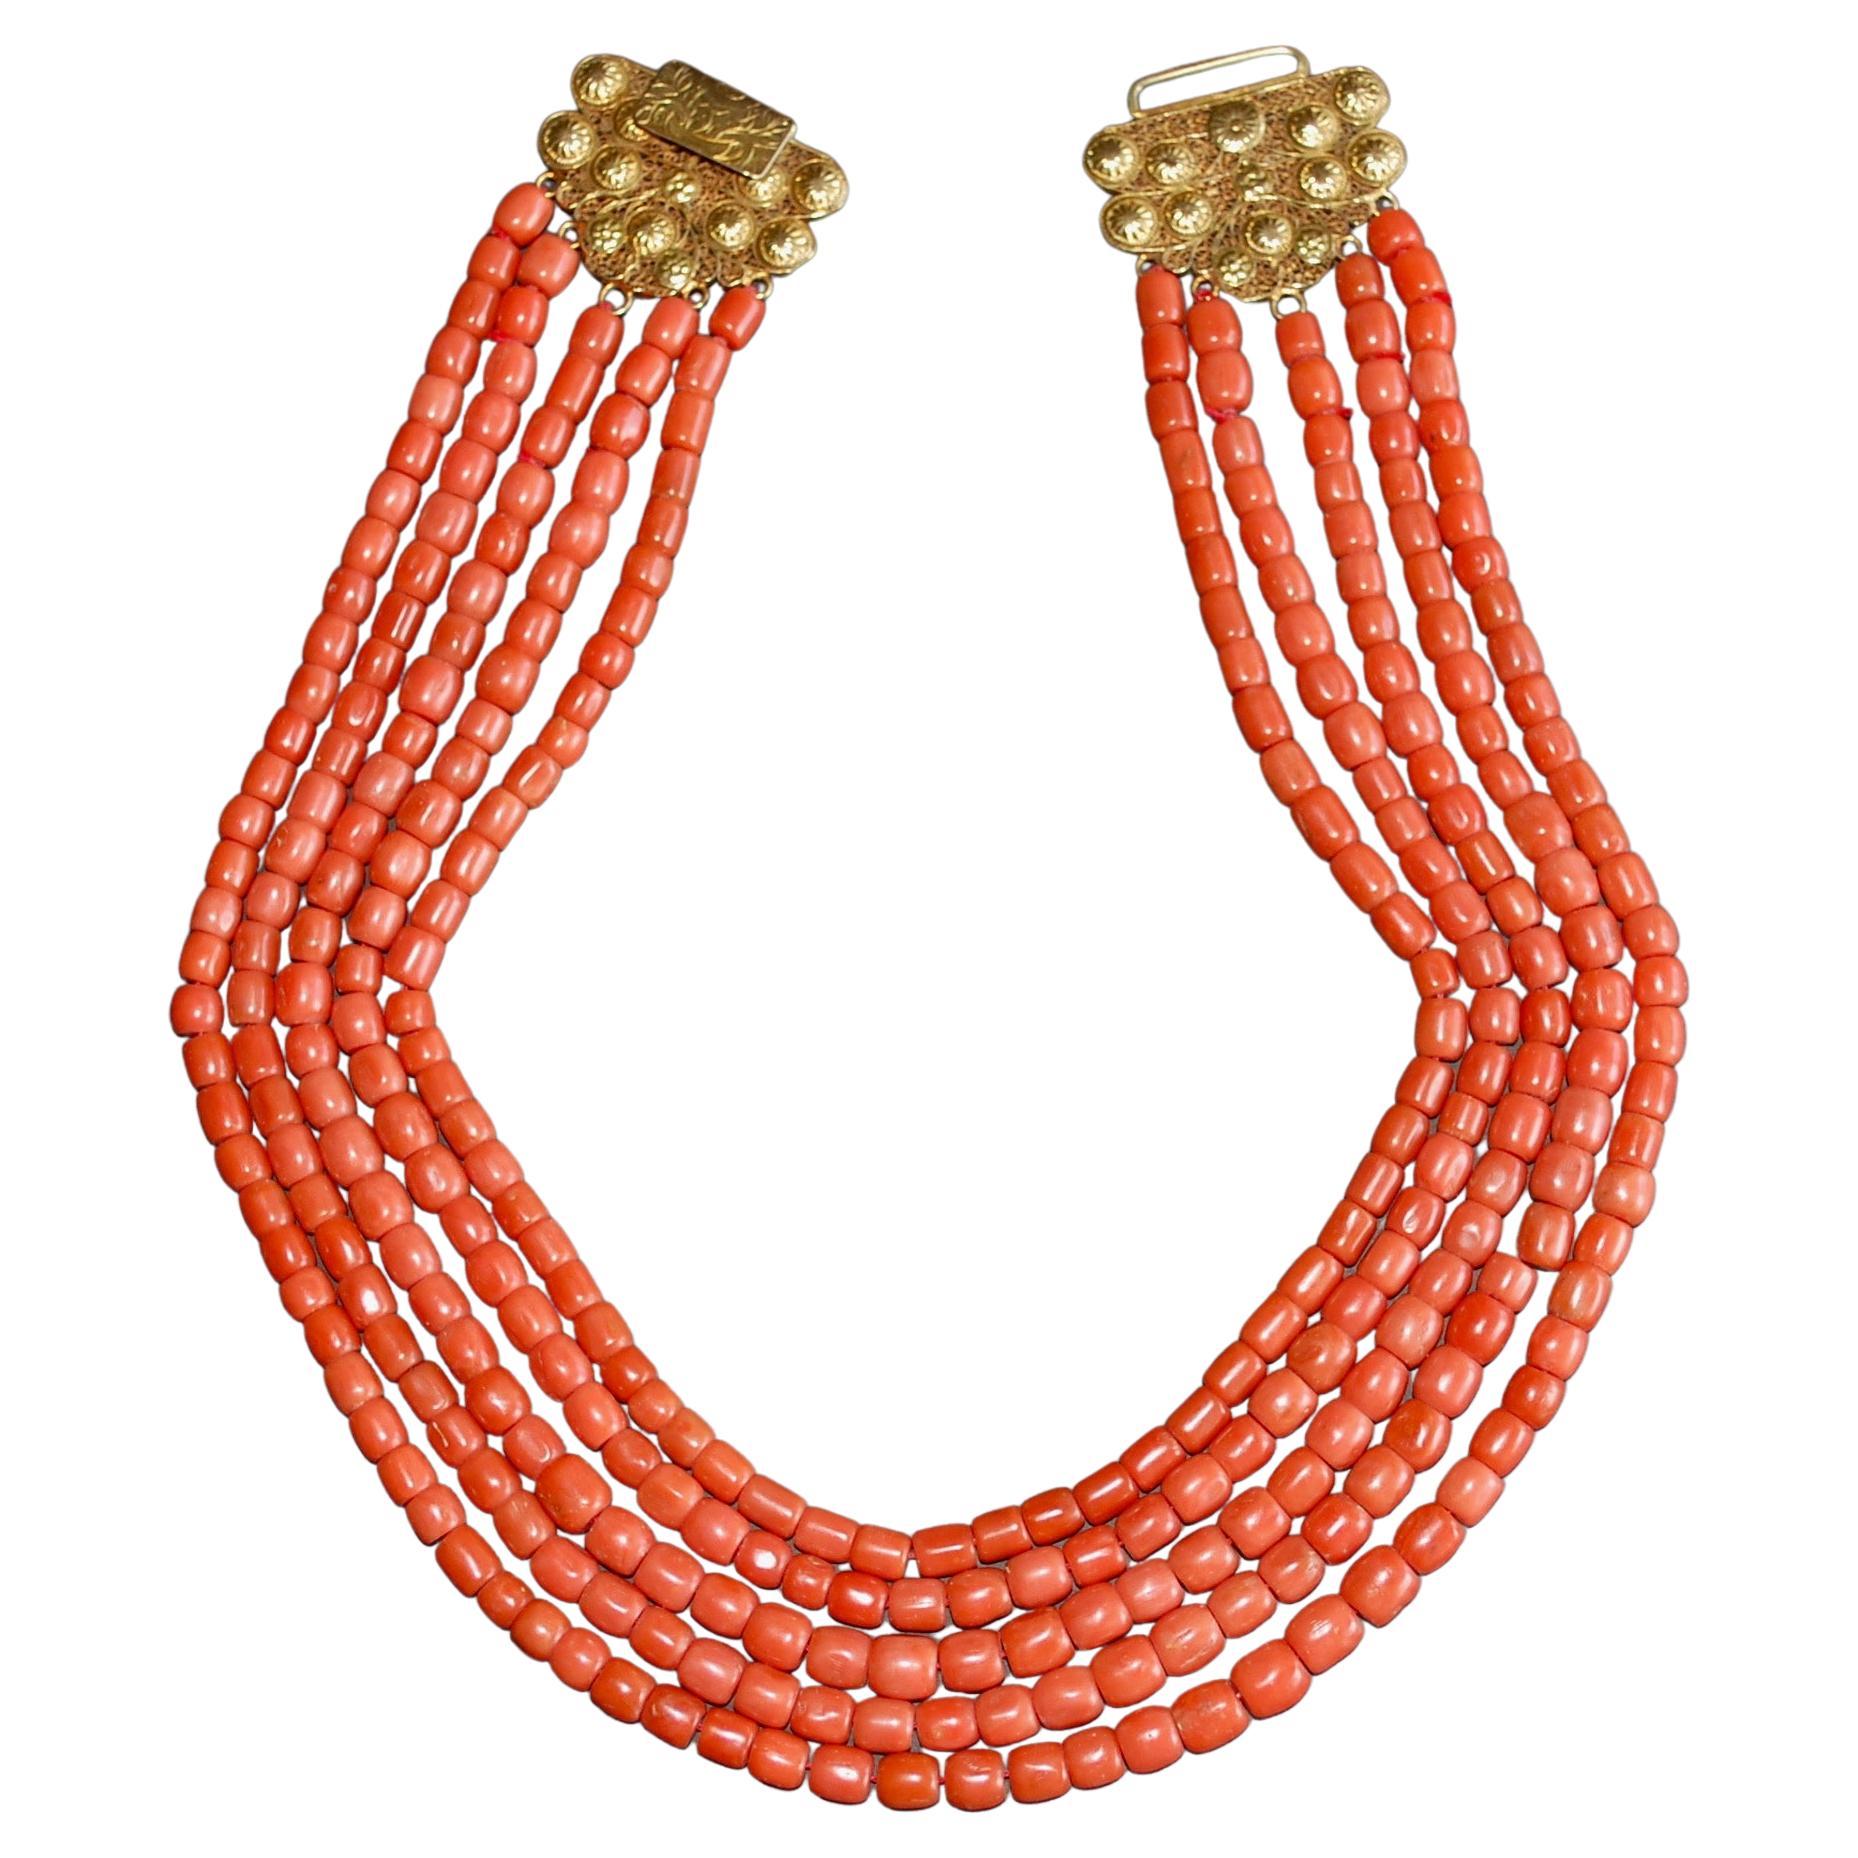 European Five Strand Red Coral 14k Gold Clasp